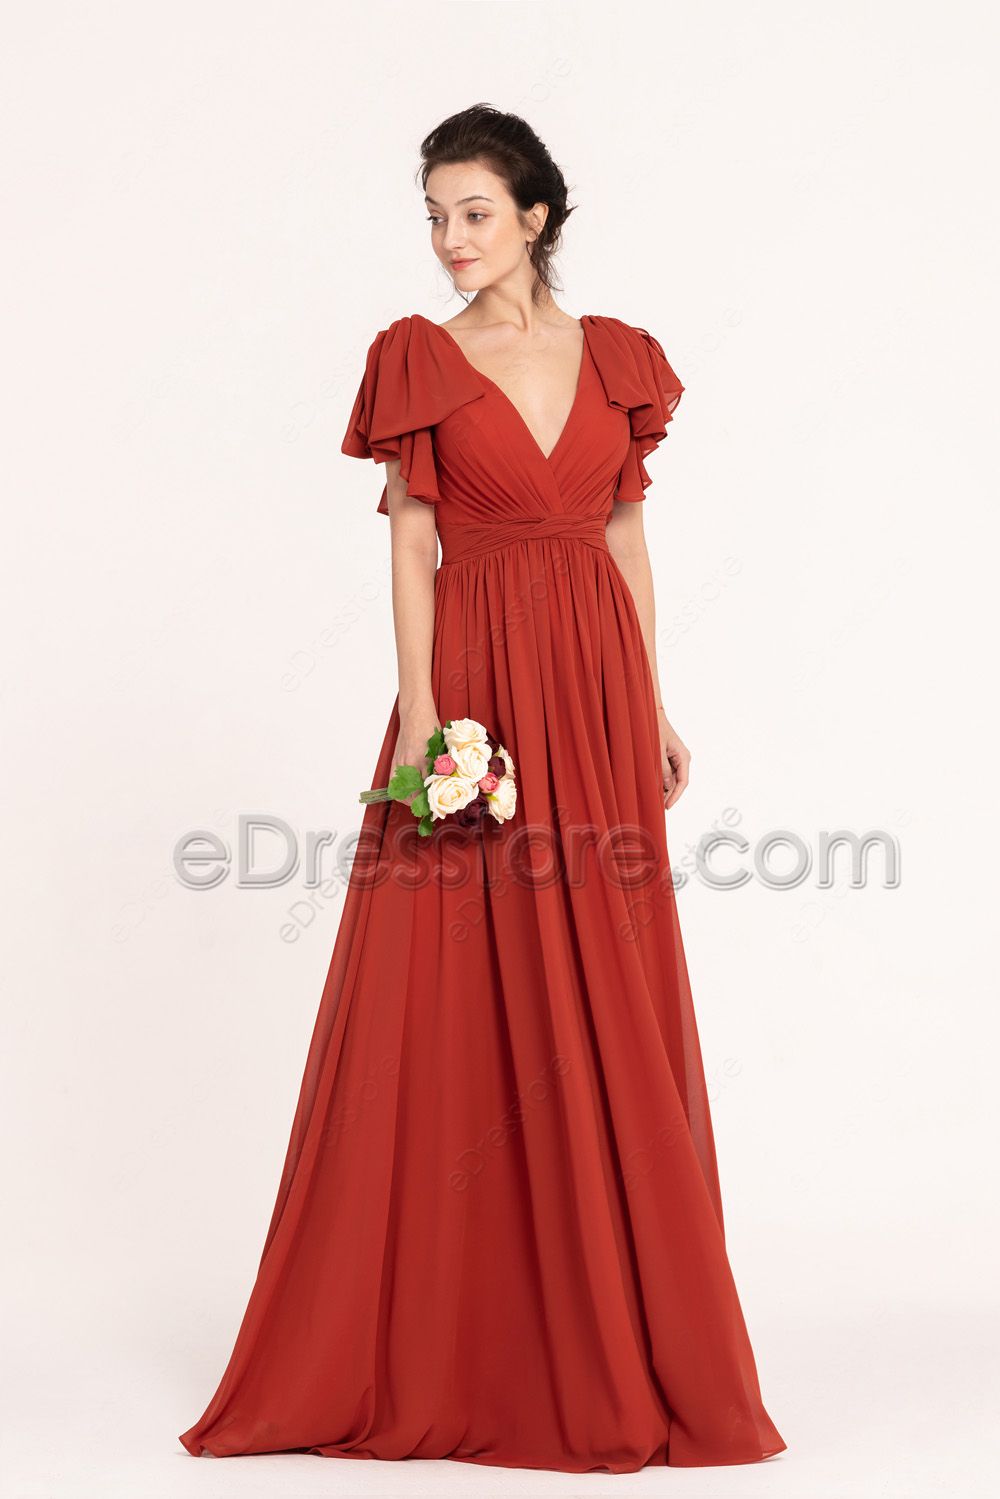 Rusted Red Modest Bridesmaid Dresses Long | eDresstore